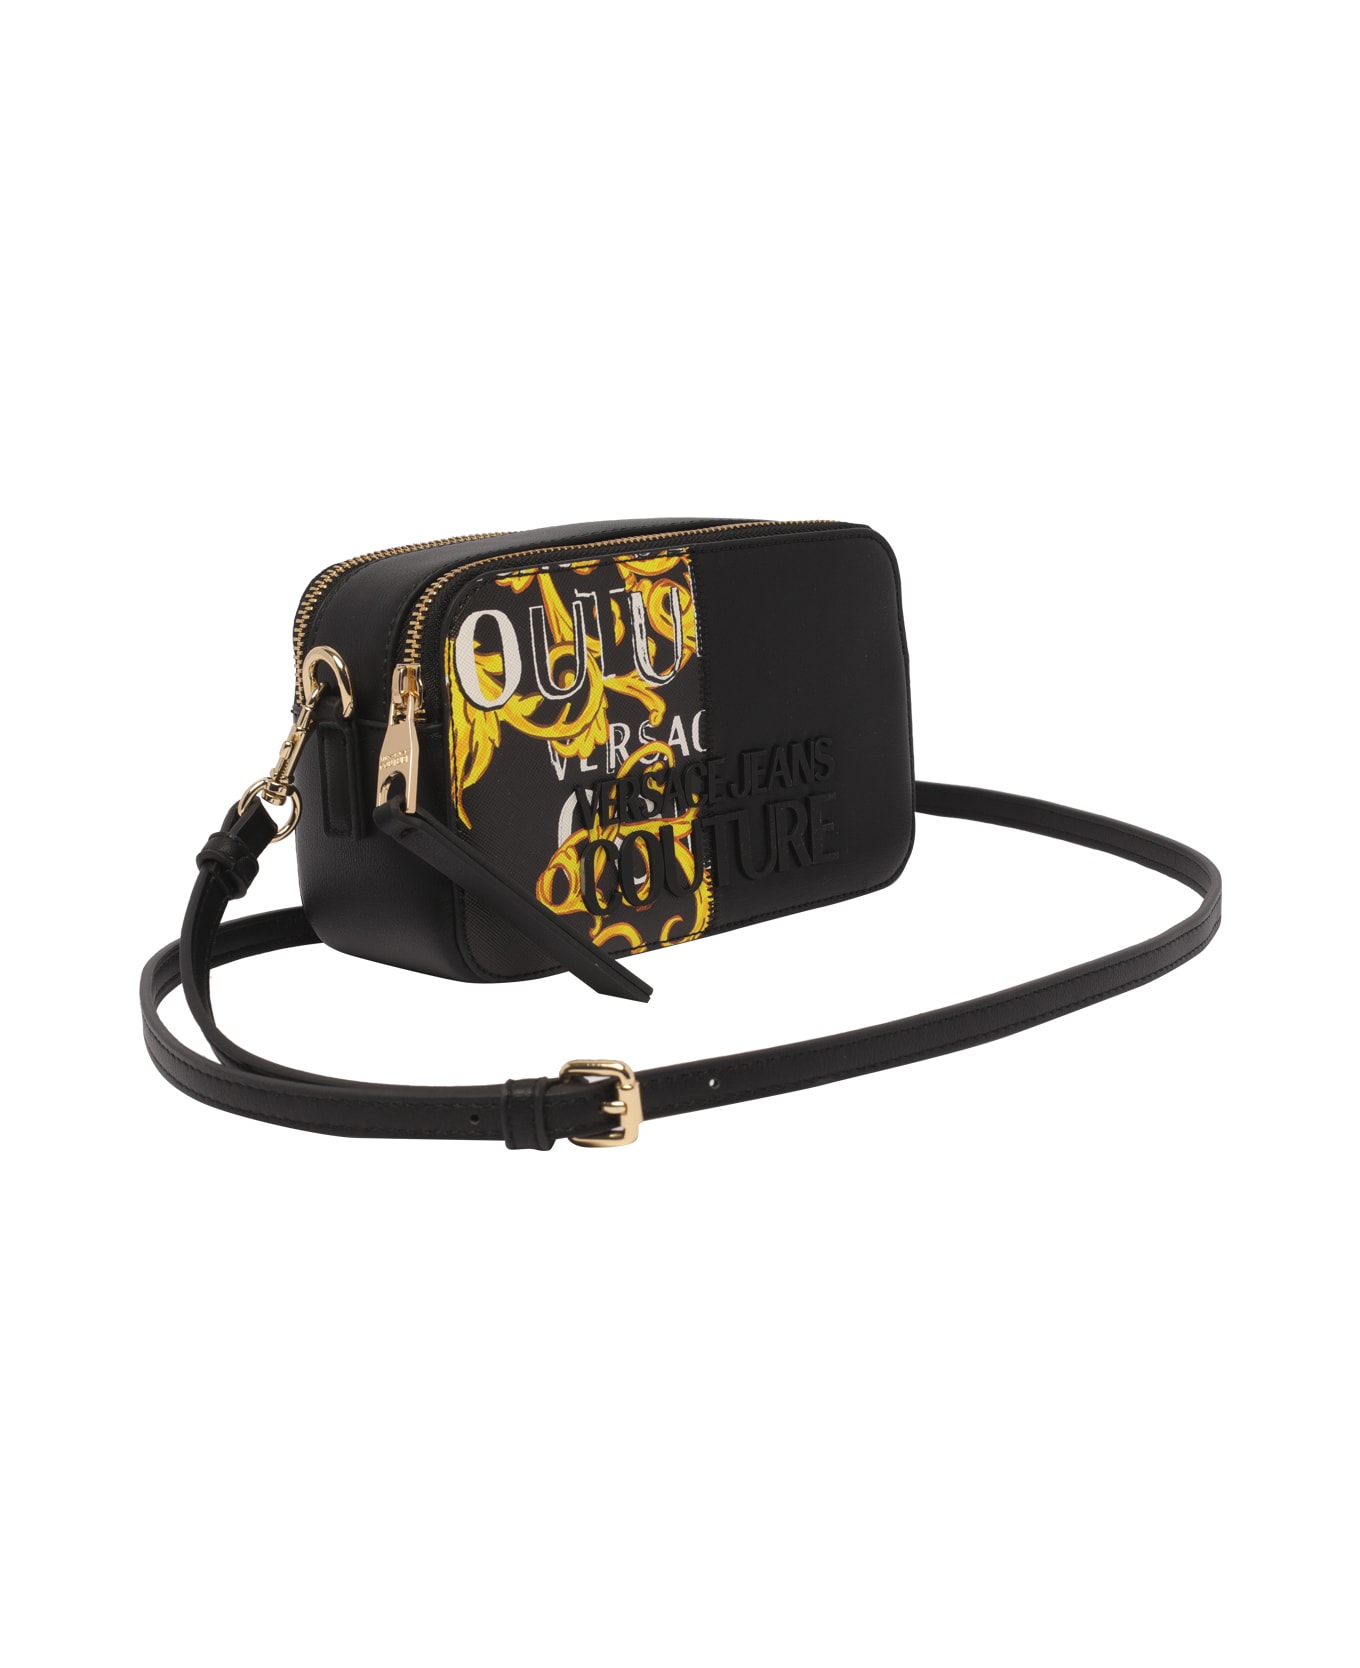 Versace Jeans Couture Bag - Black ショルダーバッグ